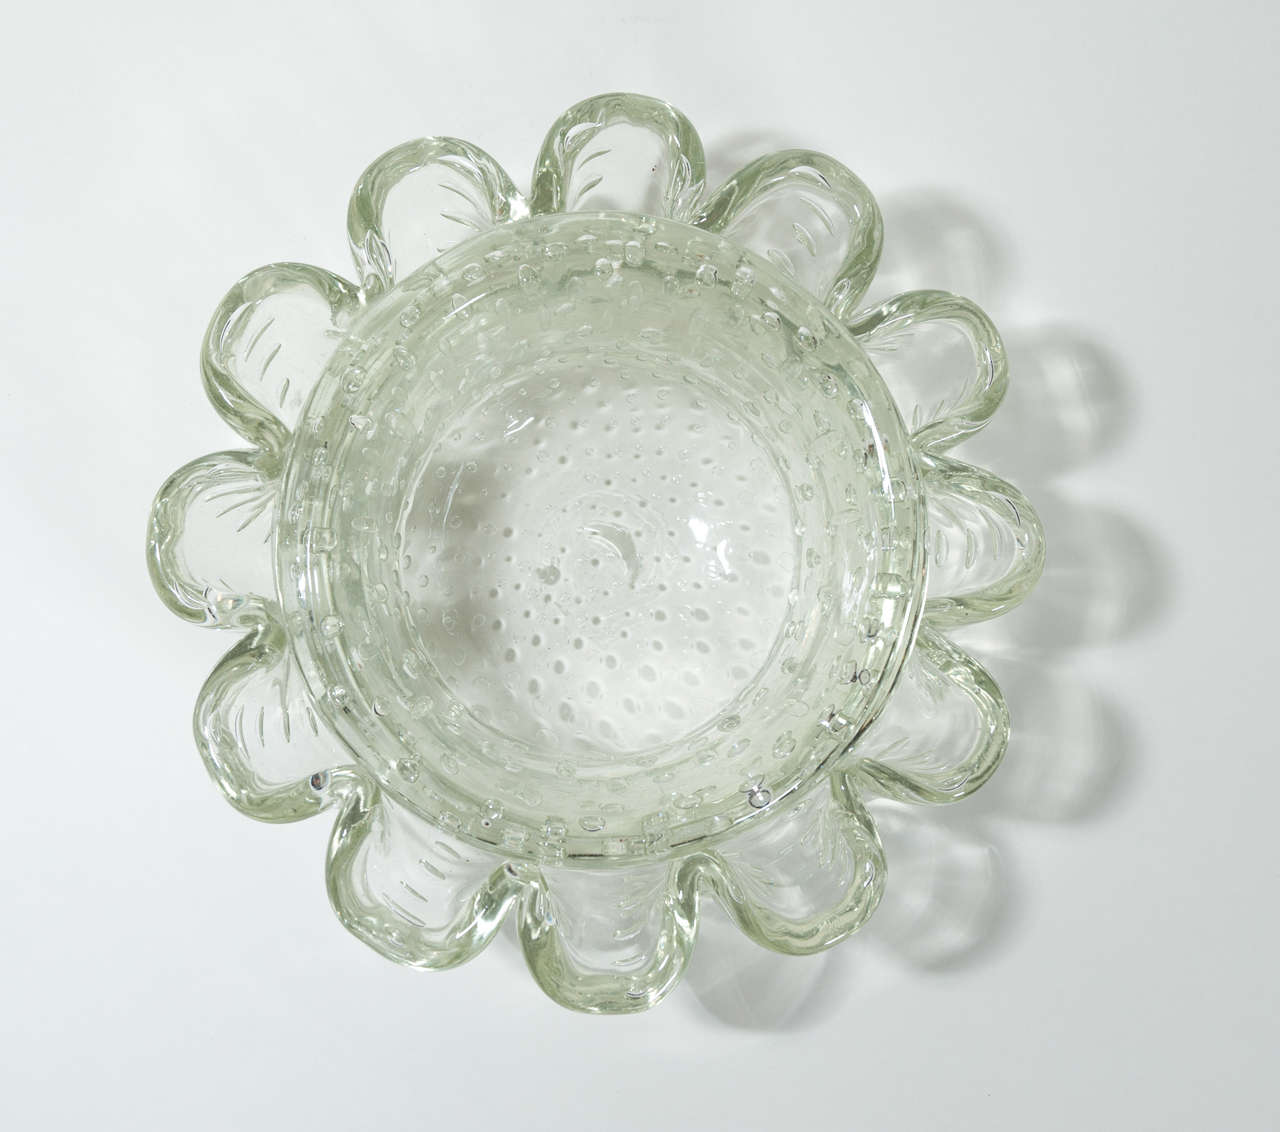 An important clear glass Murano bowl with controlled bubbles and a tasty 